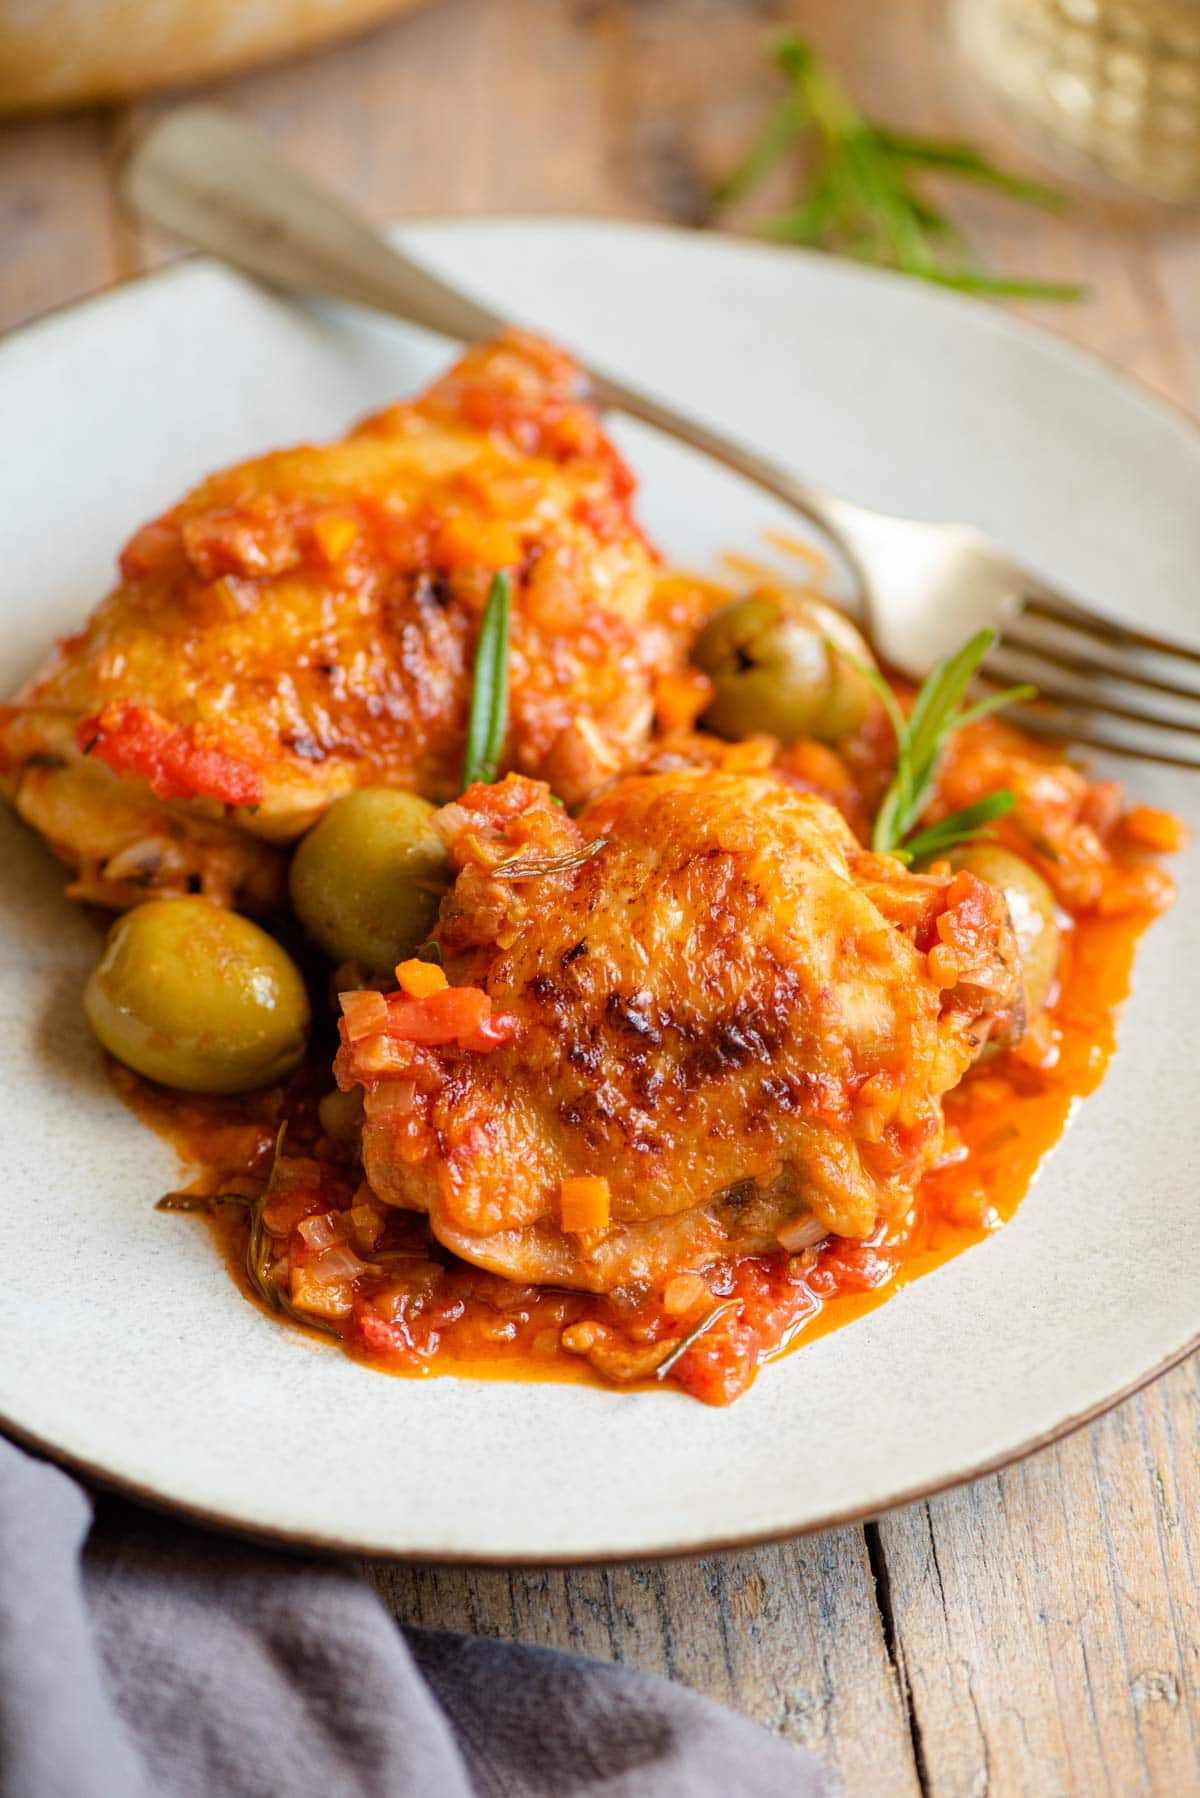 Two chicken thighs on a plate with a tomato and vegetable sauce and olives